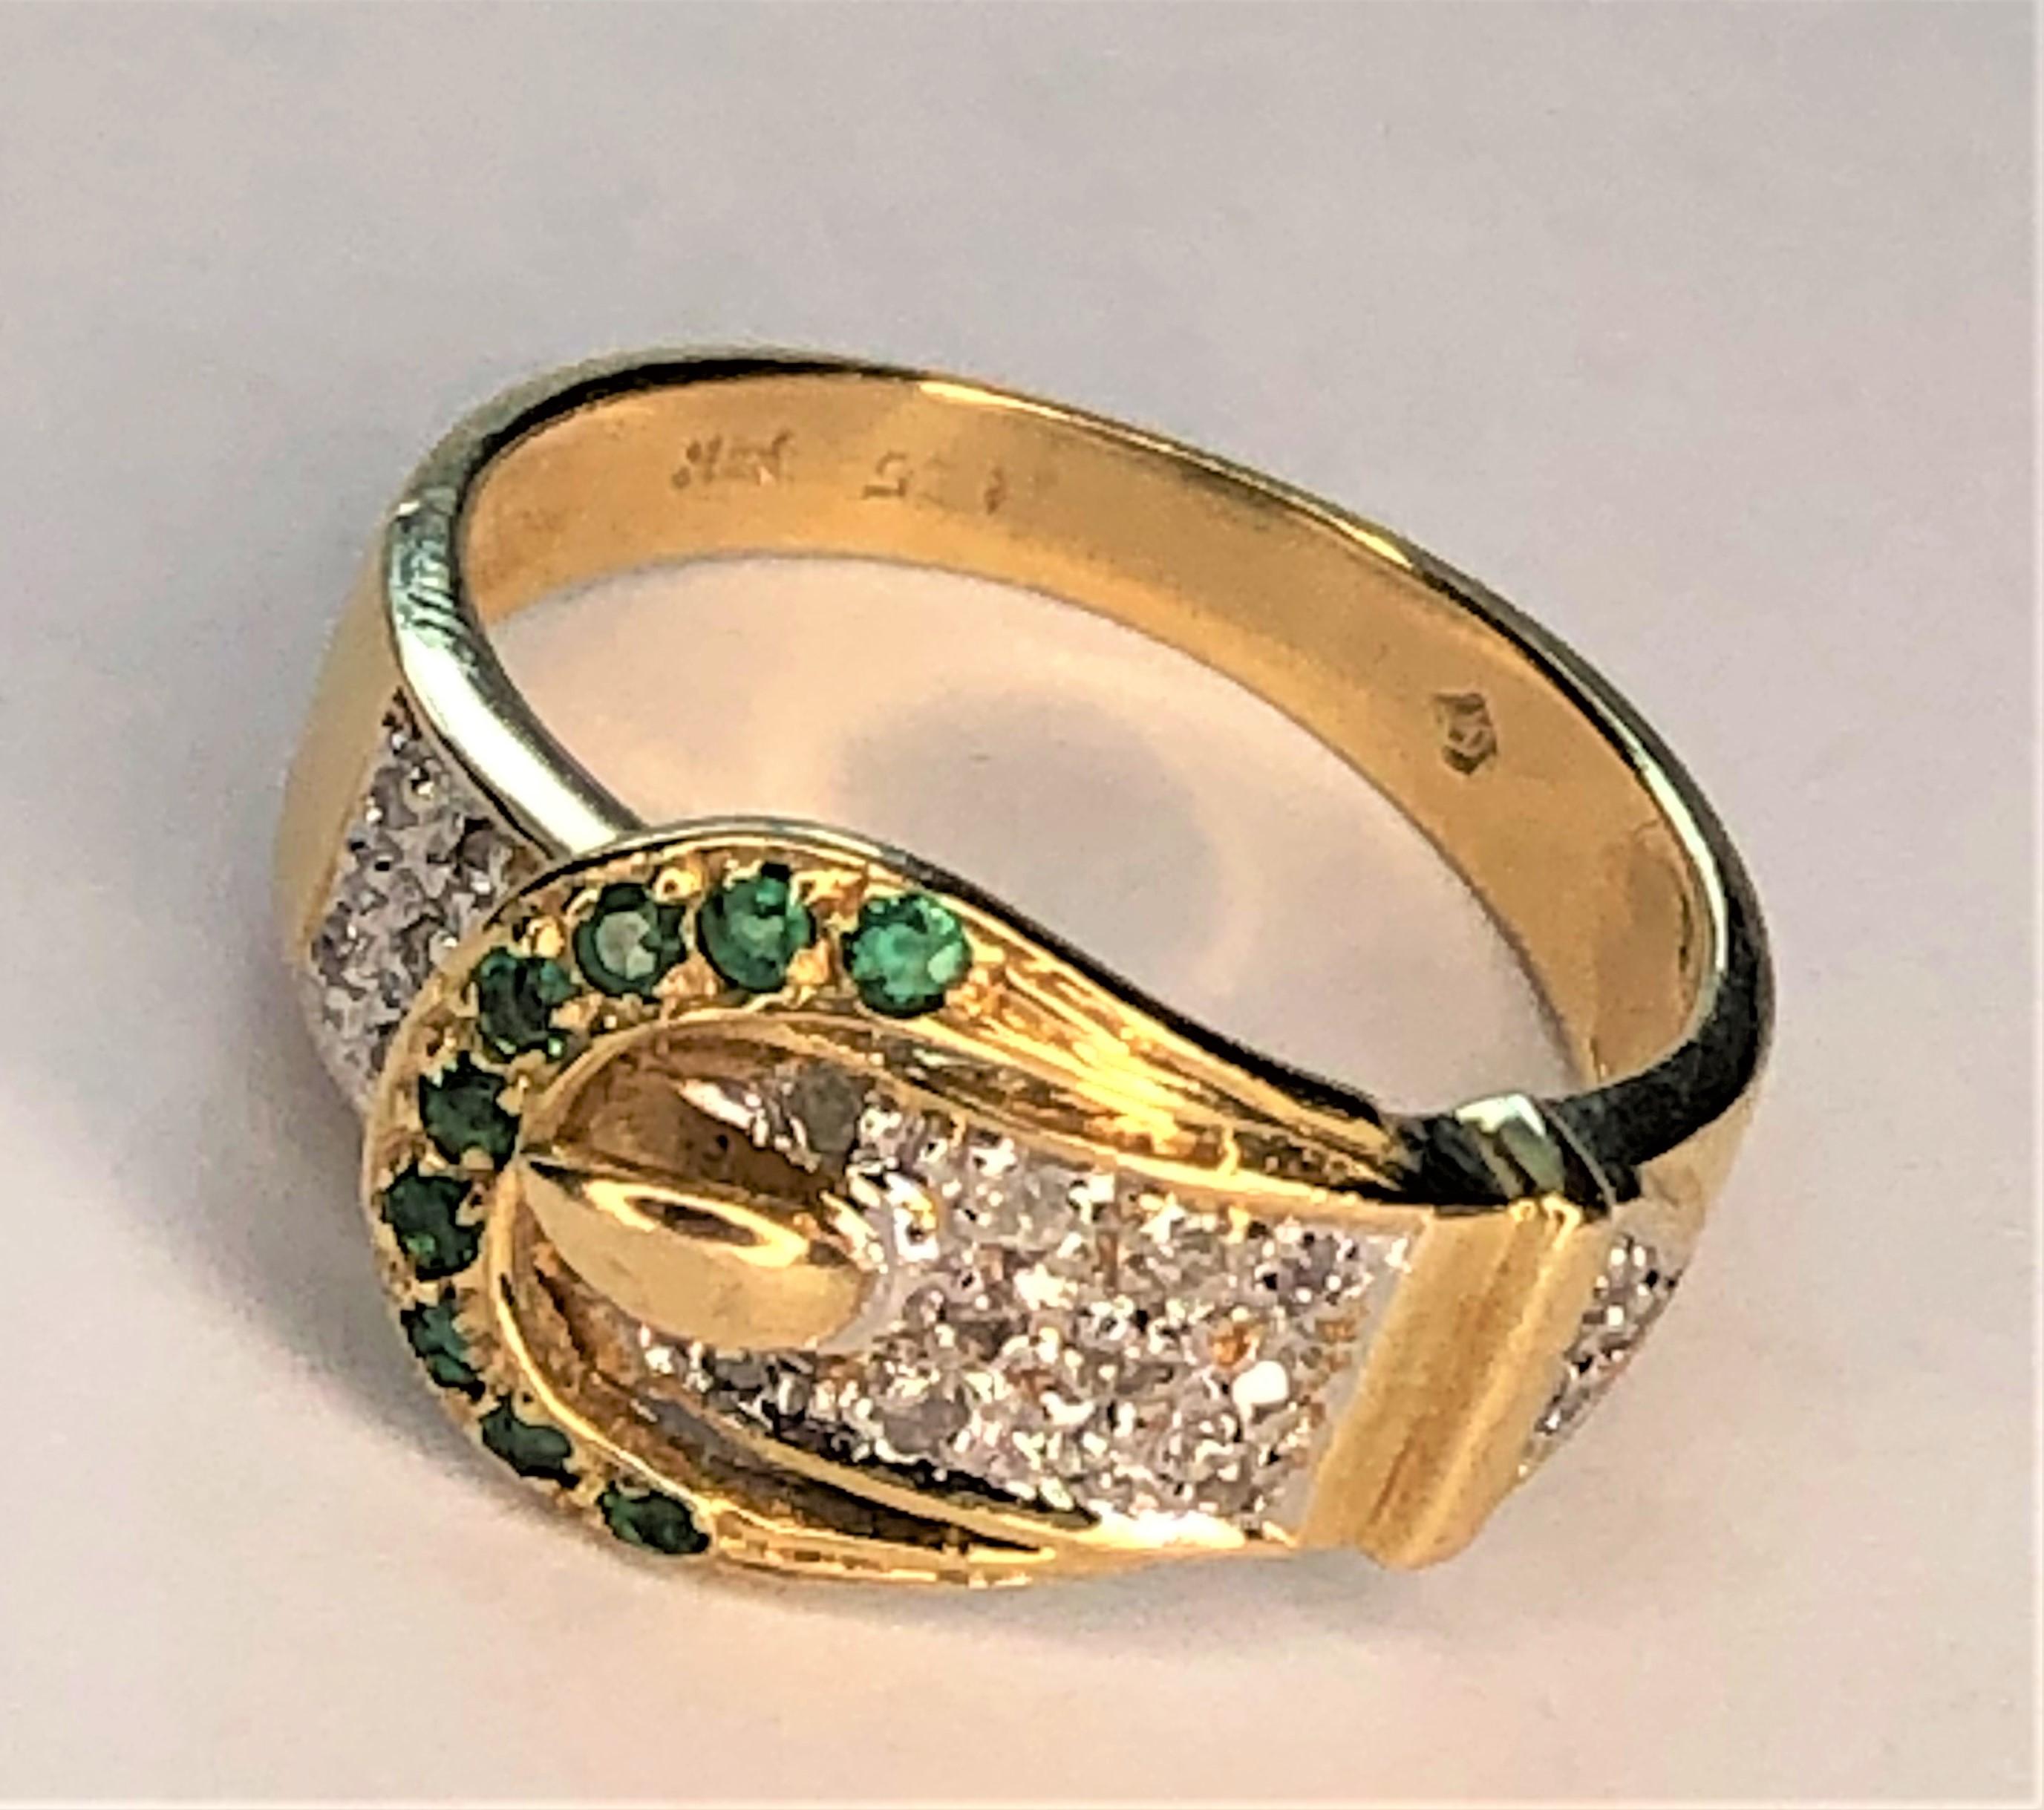 This unique ring is a great gift for anyone!
14 karat yellow and white gold with emeralds and diamonds.
9 round emeralds on part of the buckle.  
16 pave diamonds adorn part of the strap,
Approximately size 4.75 (can be sized).
Stamped 